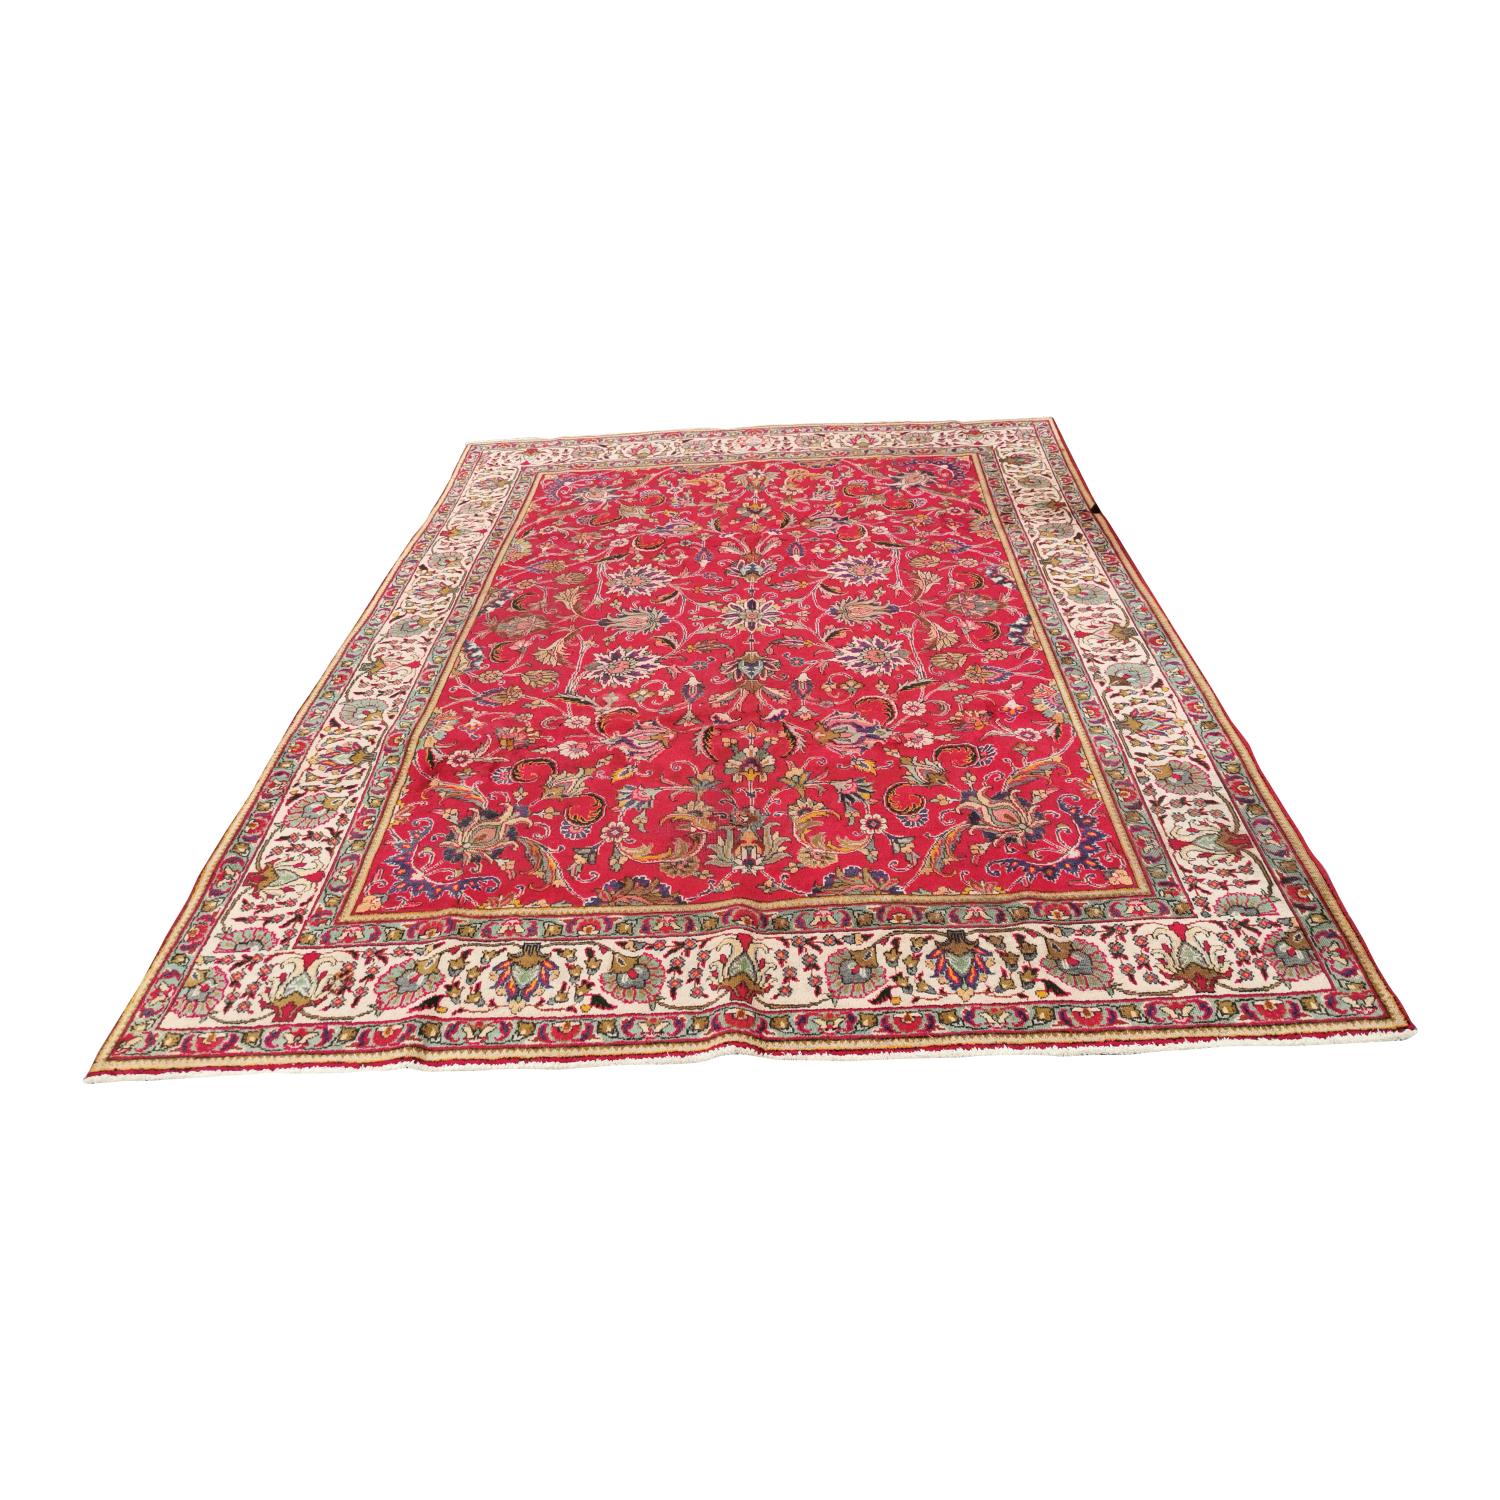 Persian Tabriz hand knotted wool carpet square.